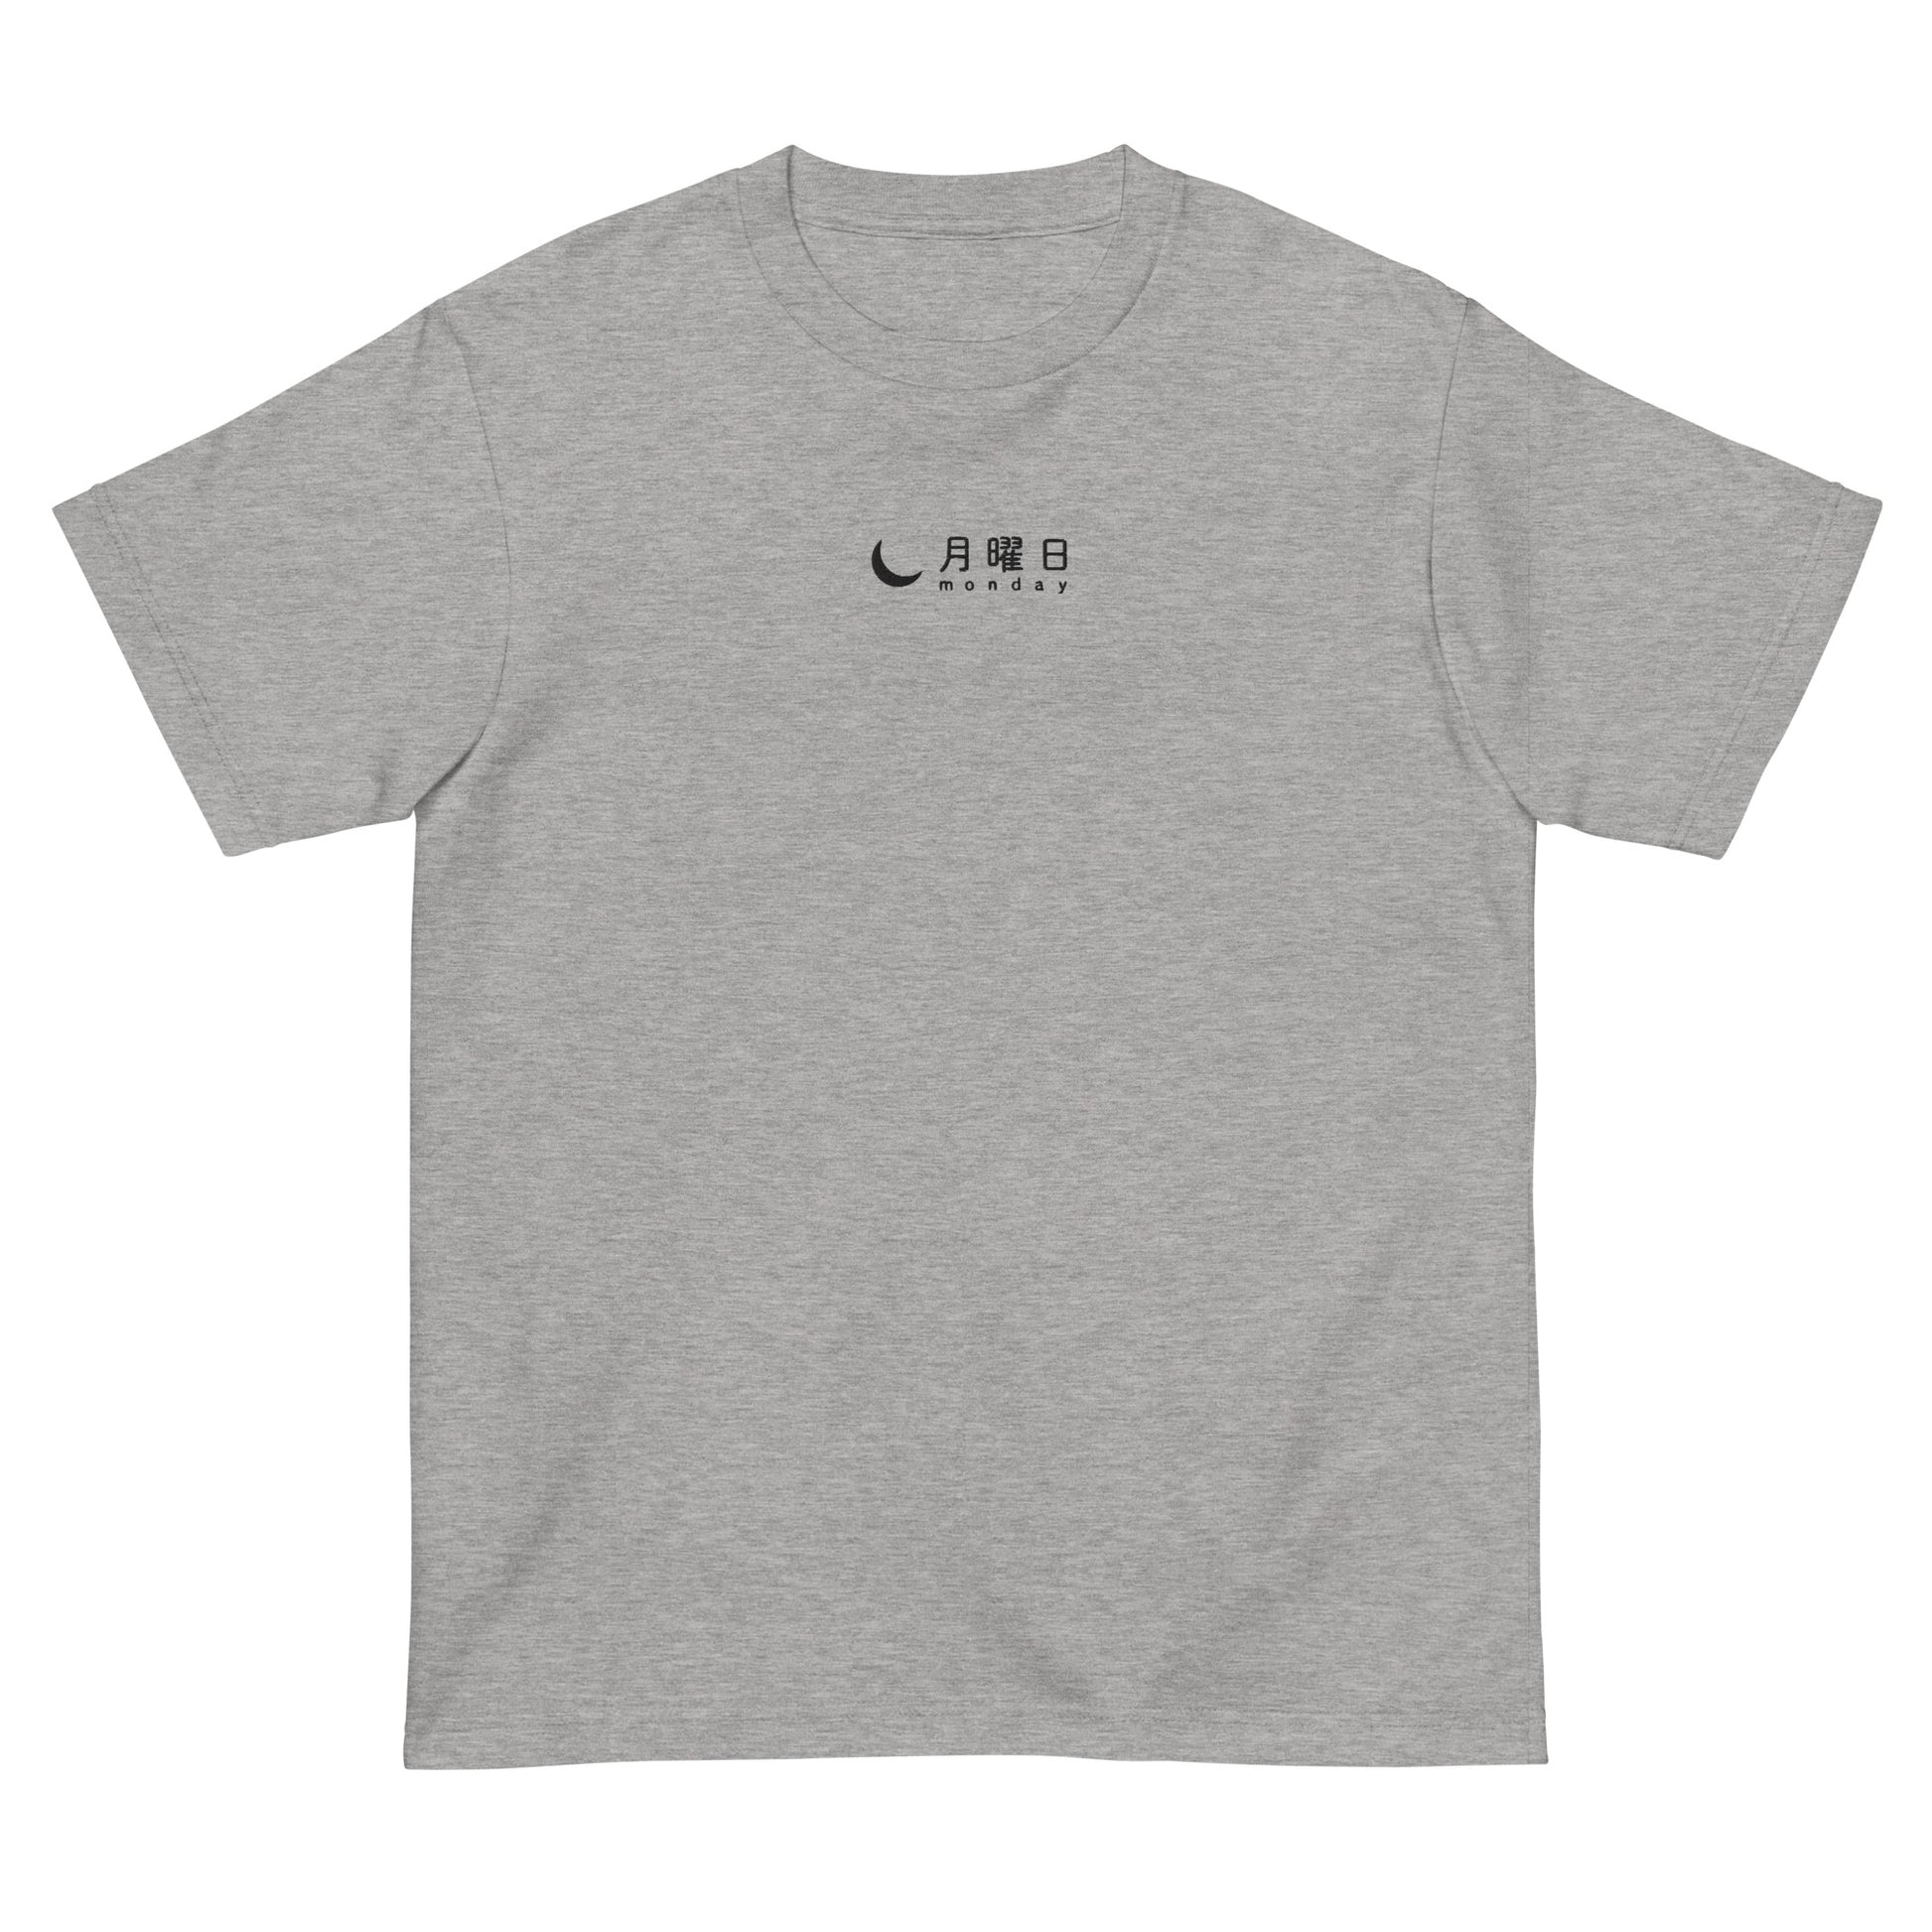 Light Gray High Quality Tee - Front Design with an Black "Monday" in Japanese and English